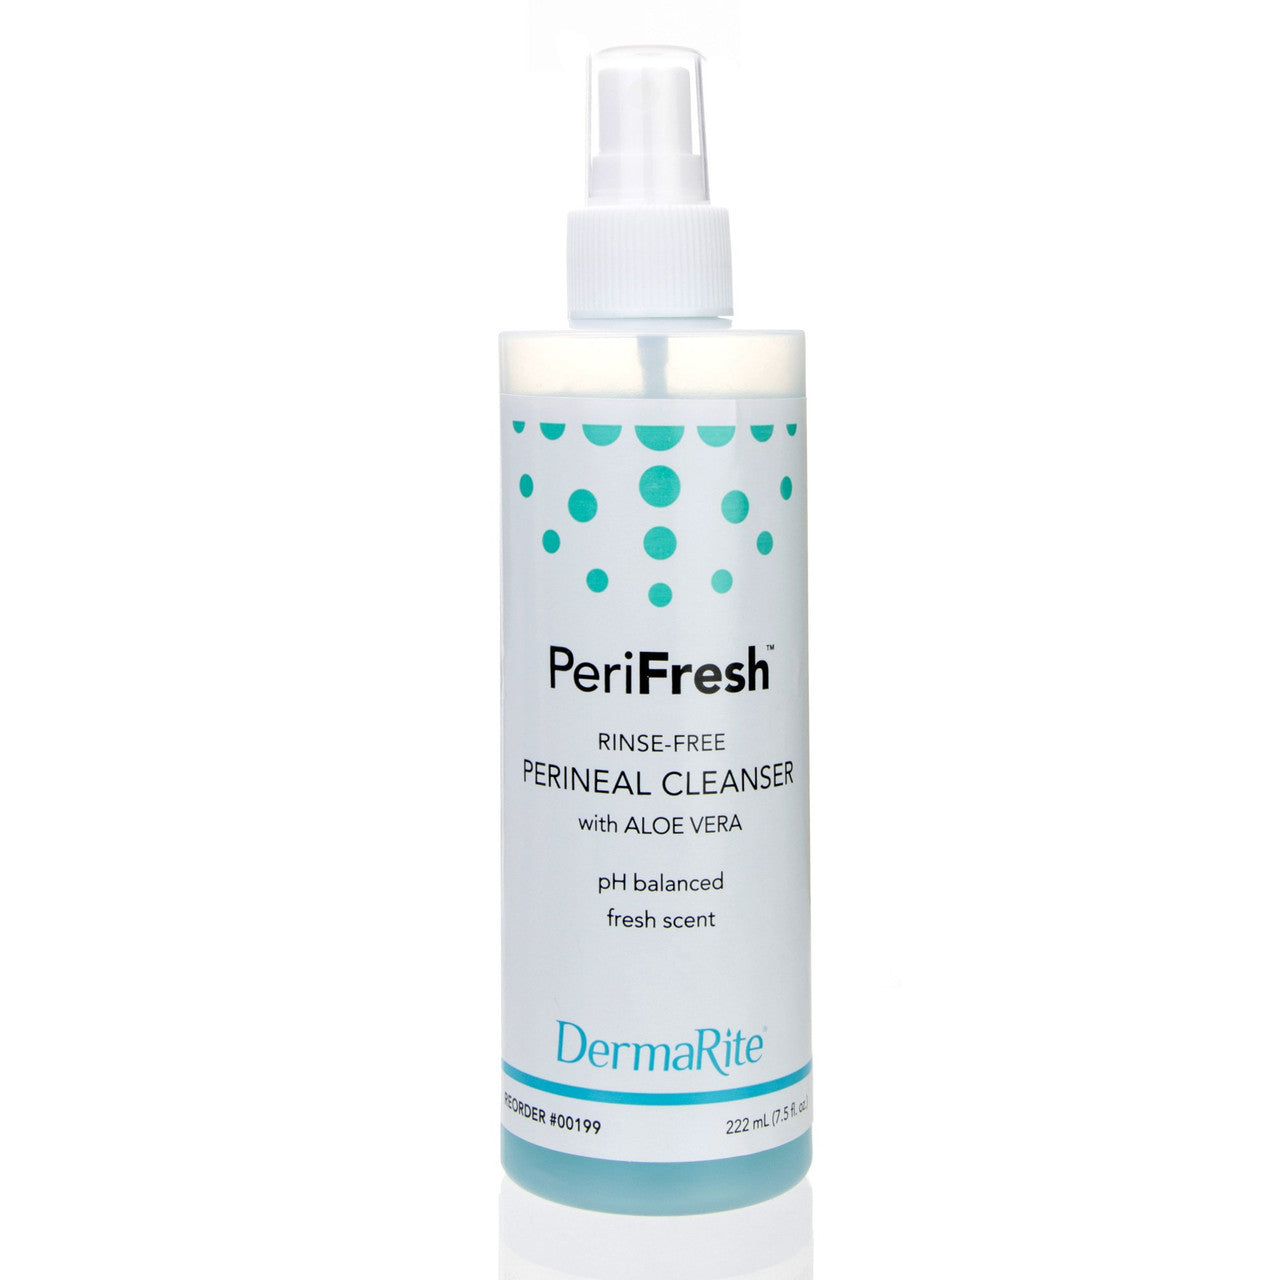 PeriFresh Perineal Cleanser with Aloe Vera - Rinse-Free Liquid, Scented